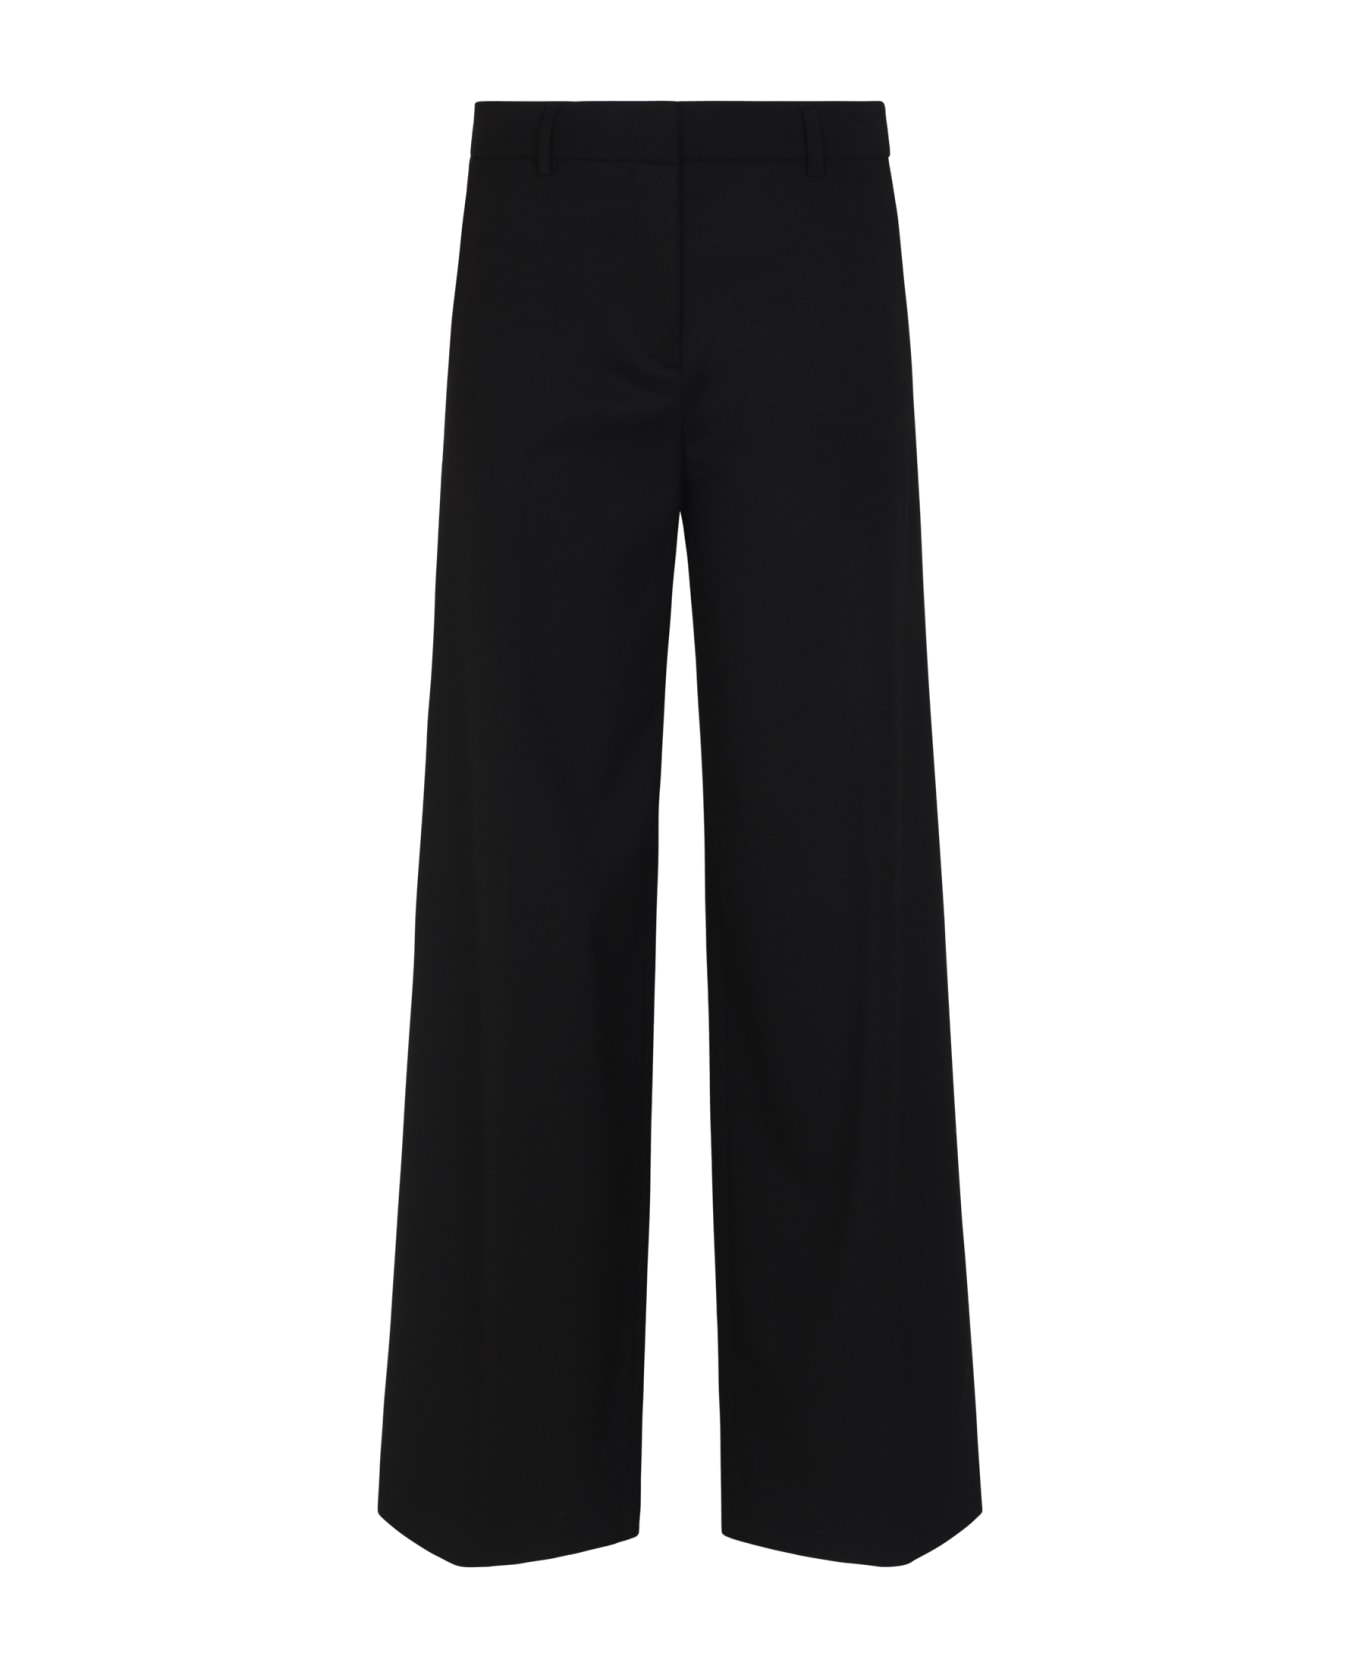 QL2 Straight Concealed con Trousers - Black